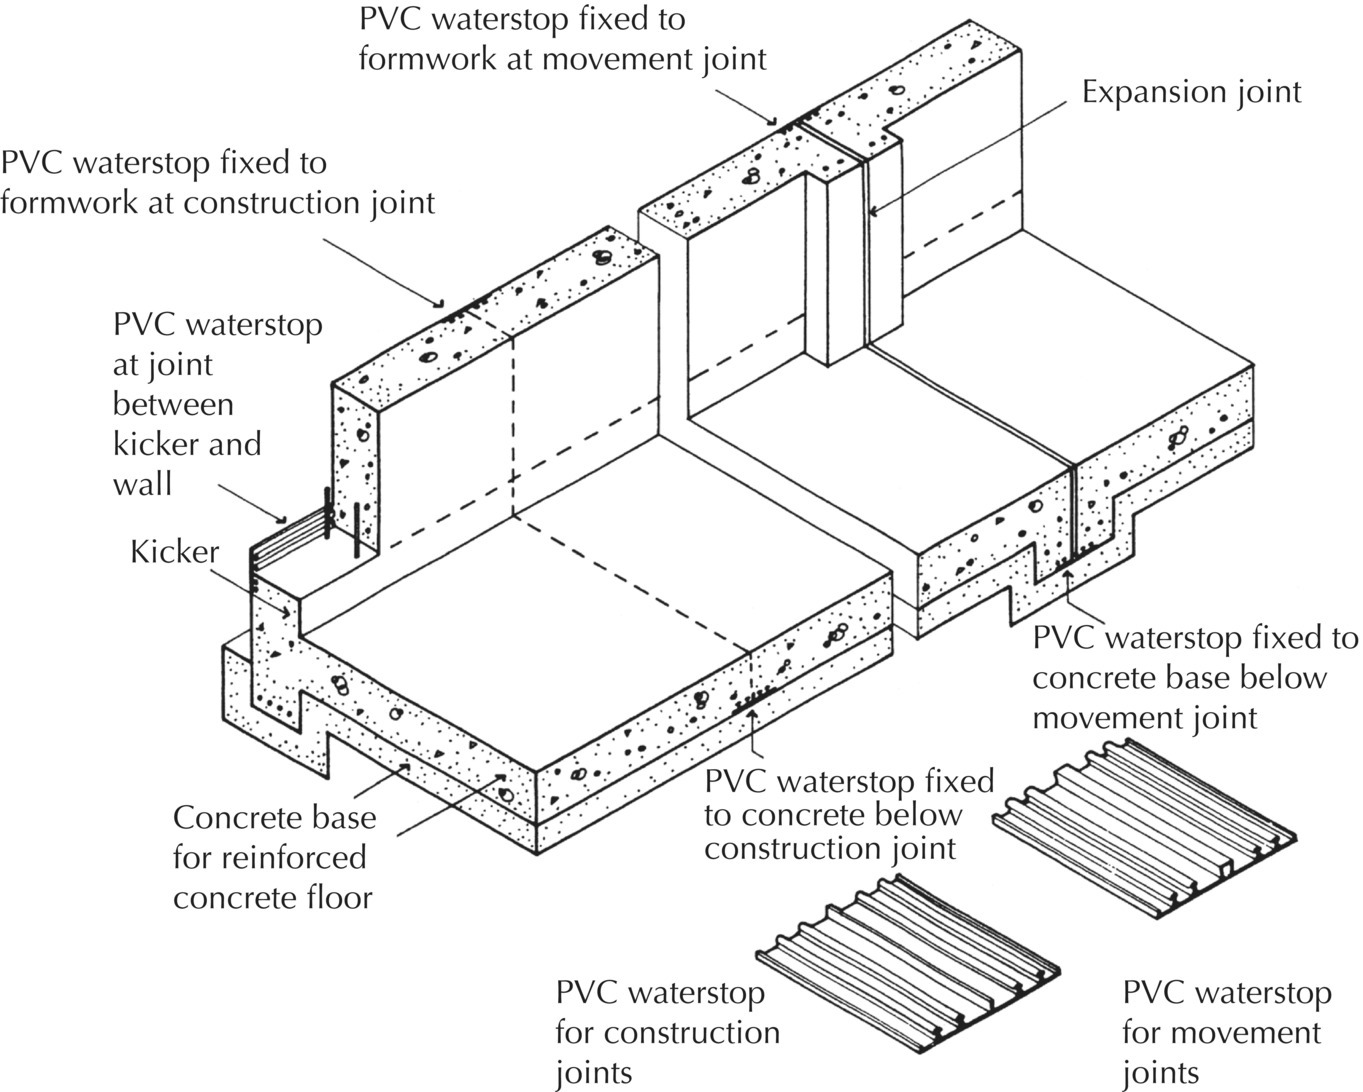 Diagram of PVC waterstops with arrows indicating concrete base for reinforced concrete floor, PVC waterstop fixed to formwork at construction joint, kicker, PVC waterstop fixed to formwork at movement joint, etc.